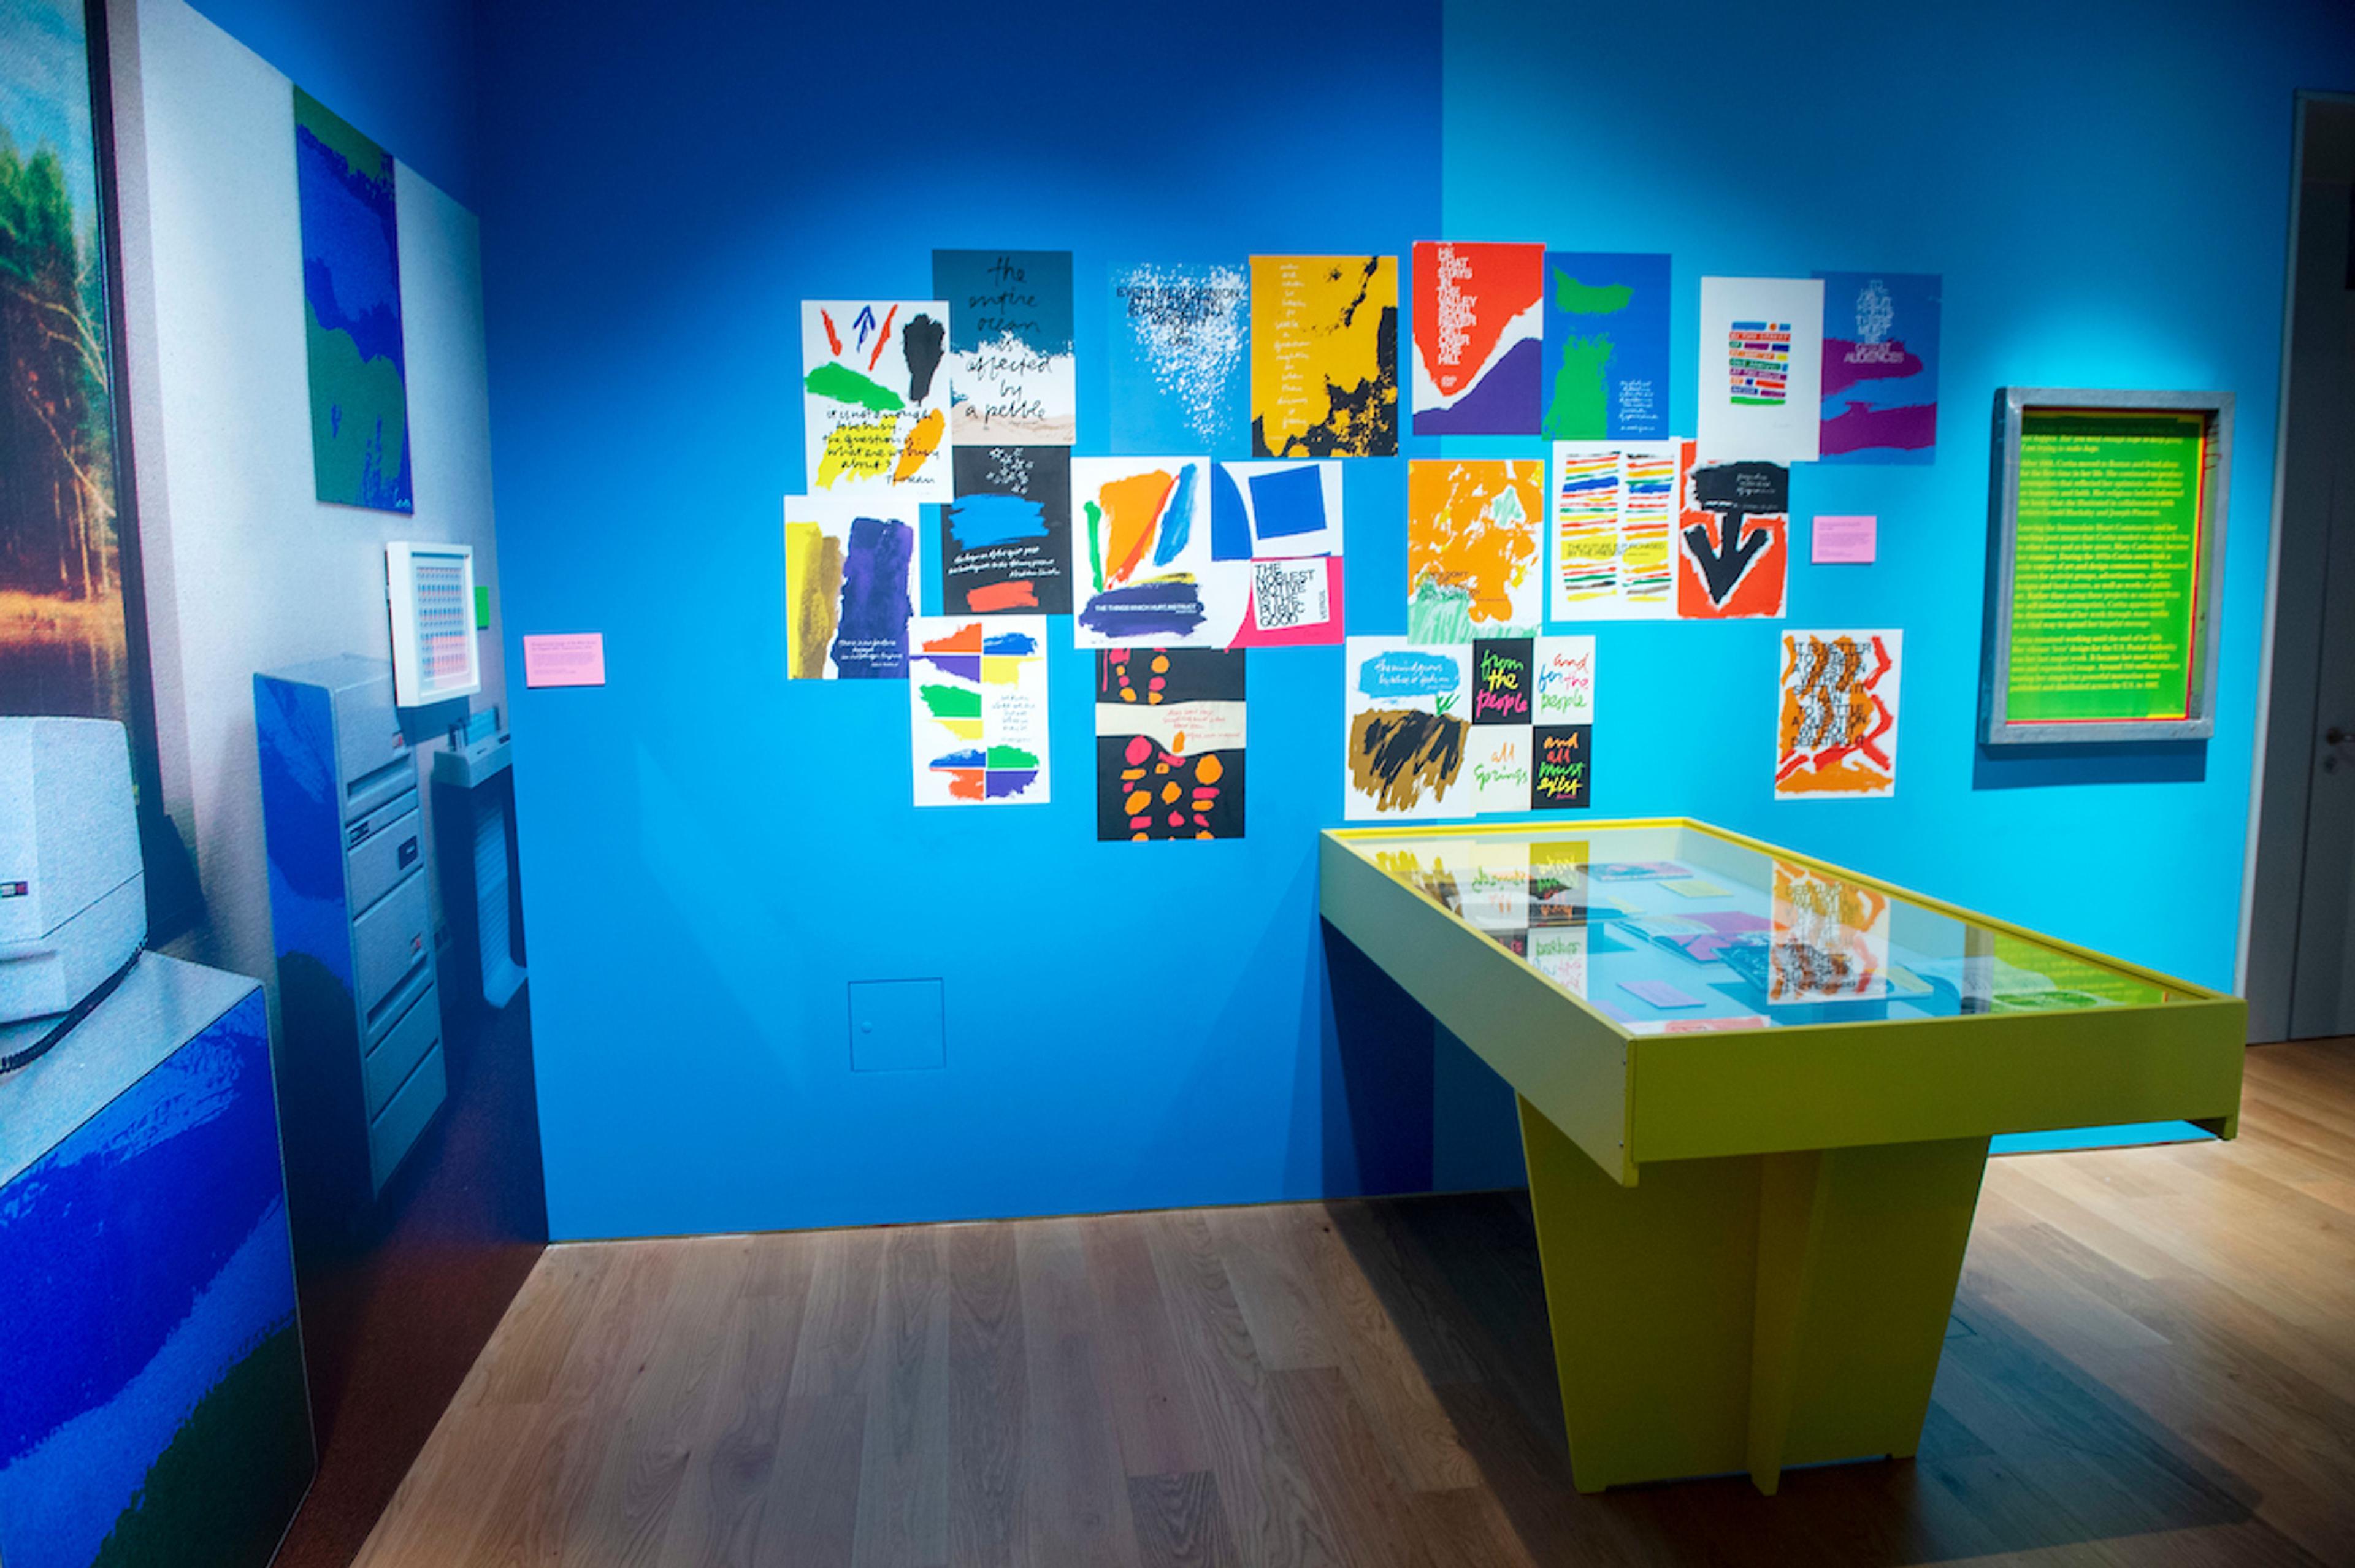 Photograph from the exhibition featuring a blue wall and display cases with illustrations on display